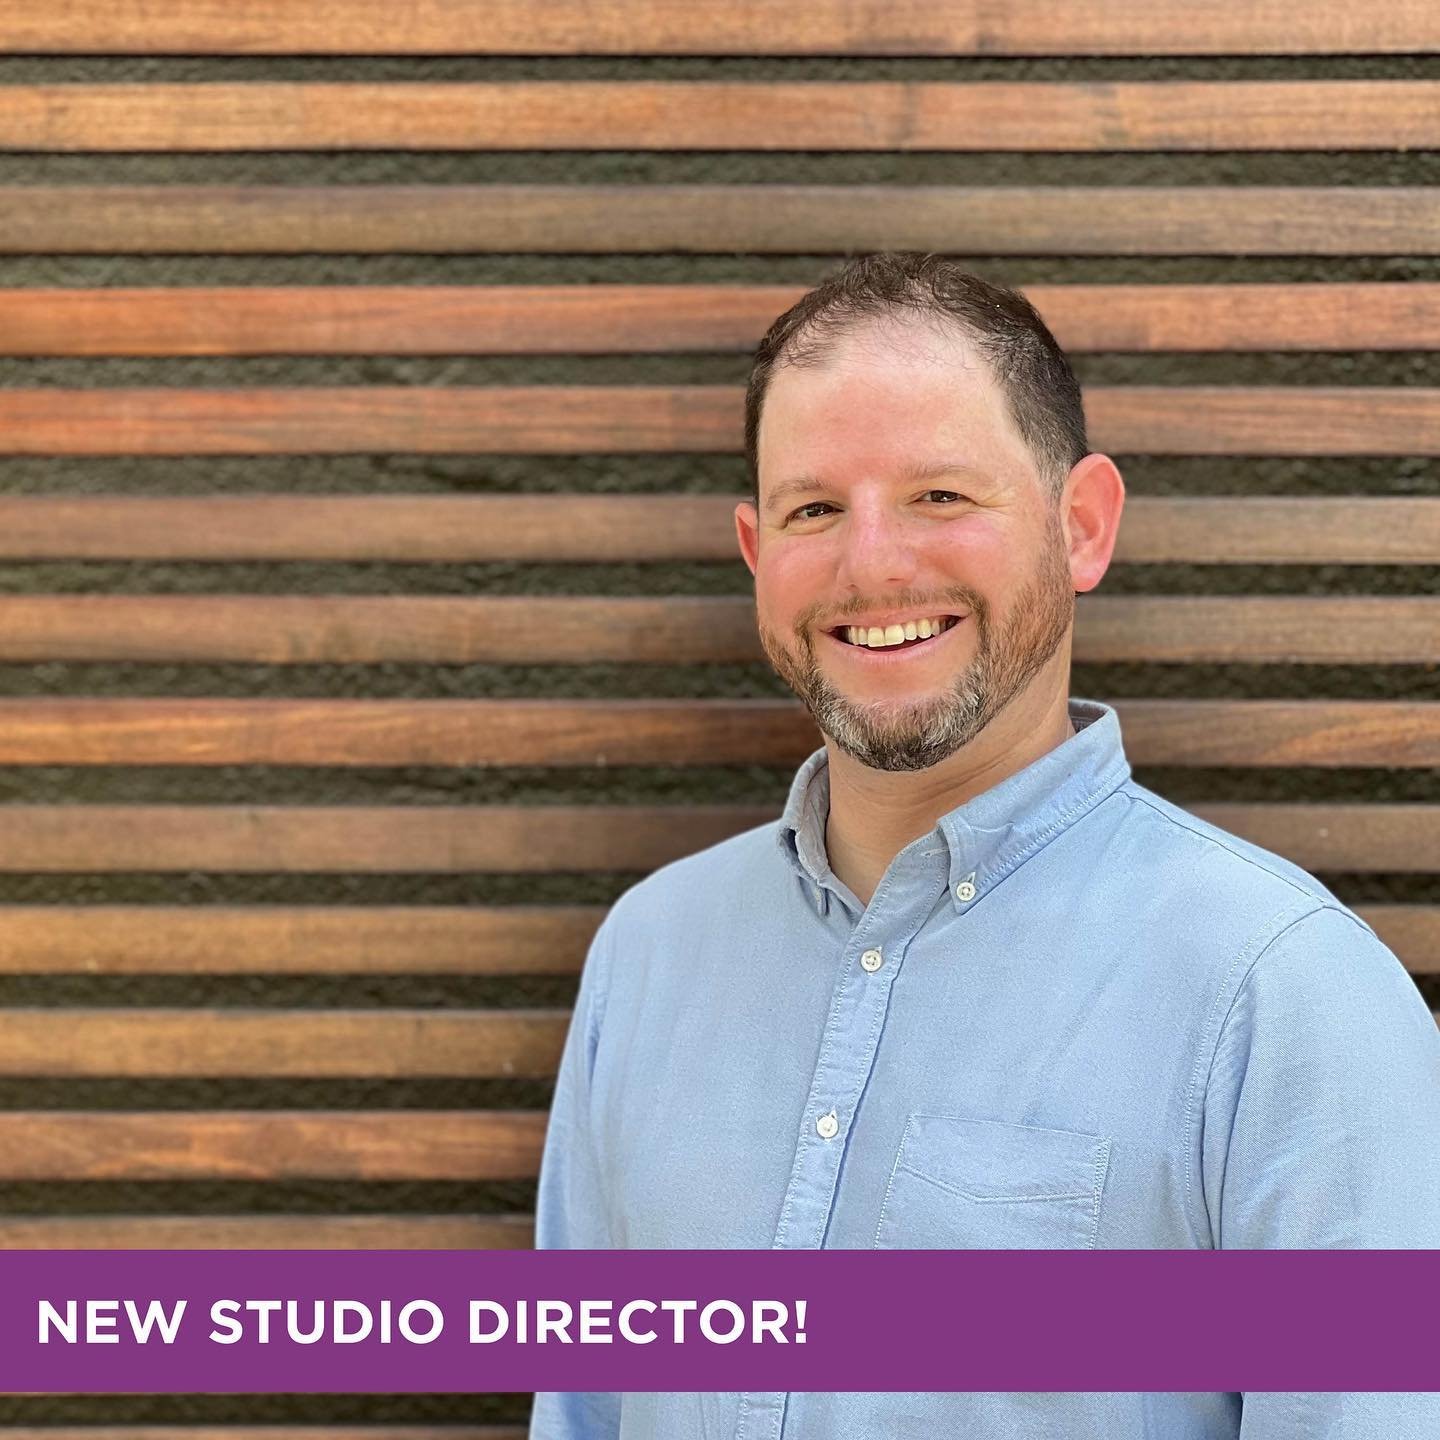 Happy New Year from Lubrano Ciavarra!
 
As we head into our 24th year we are thrilled to announce&hellip;
 
Josh Barkan, A.I.A., LEED has been named Studio Director. Over the last 11 years with the firm, Josh&rsquo;s can-do personality enables him to